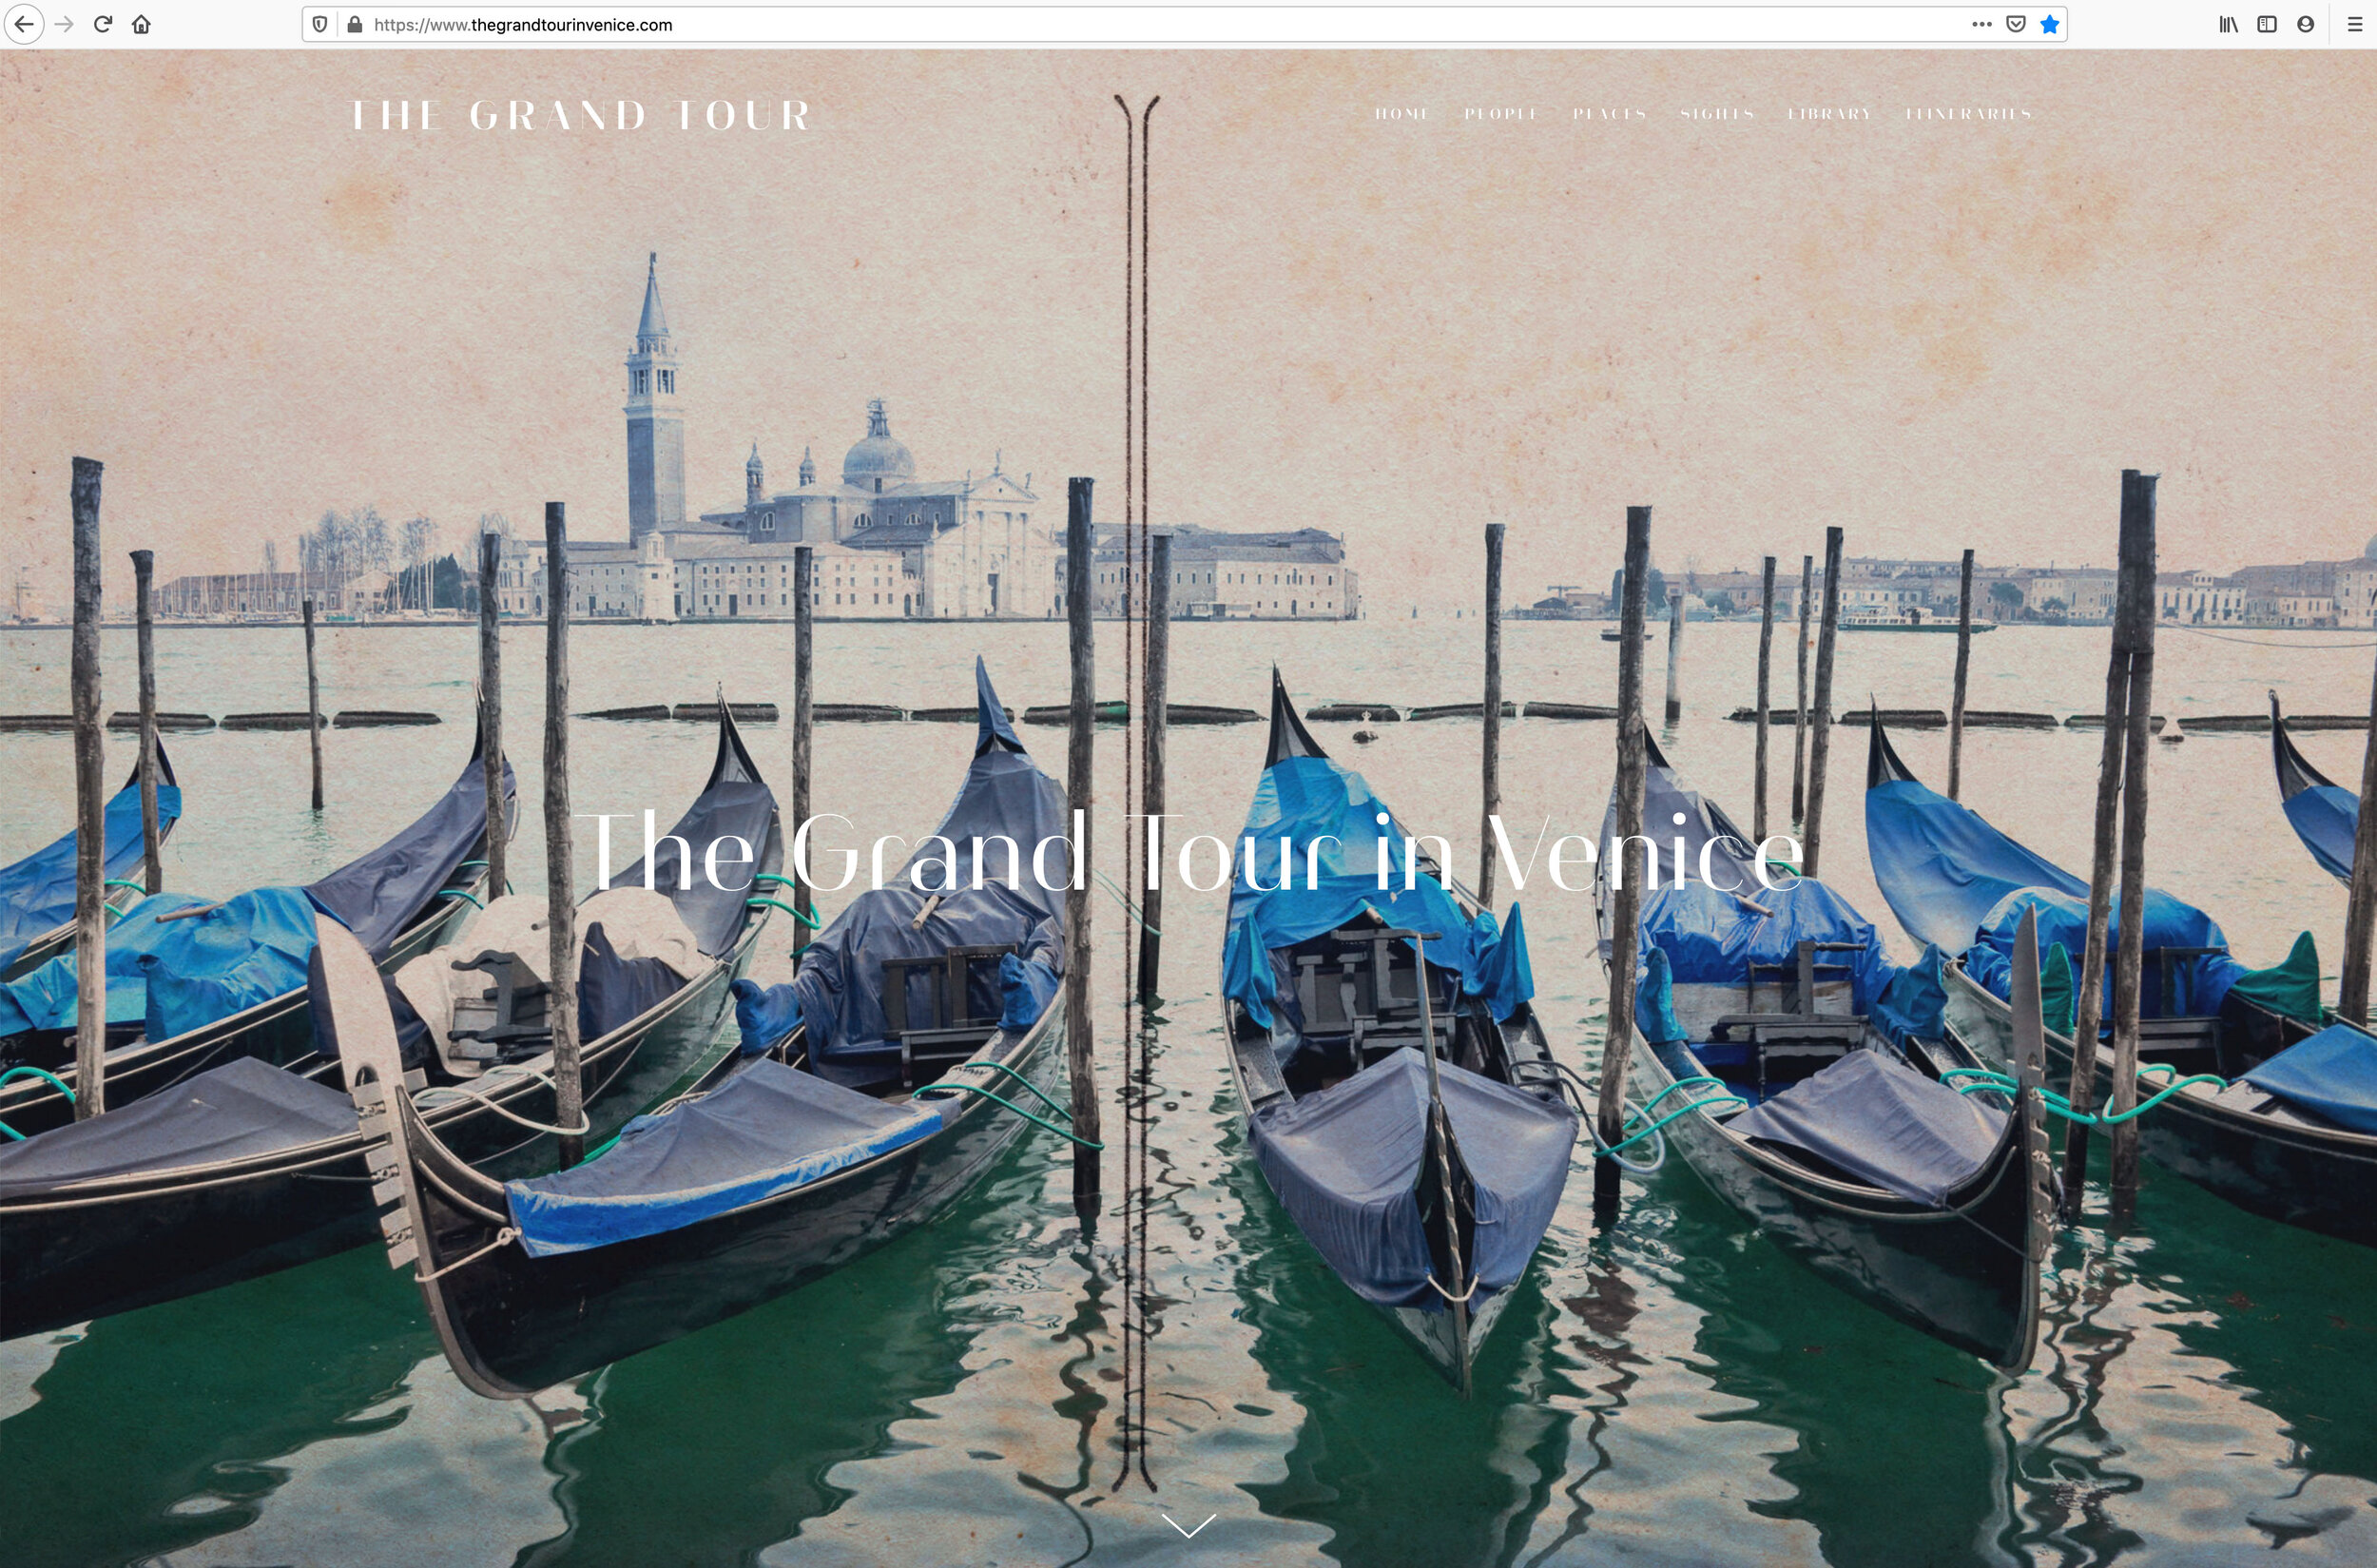 the grand tour in venice website